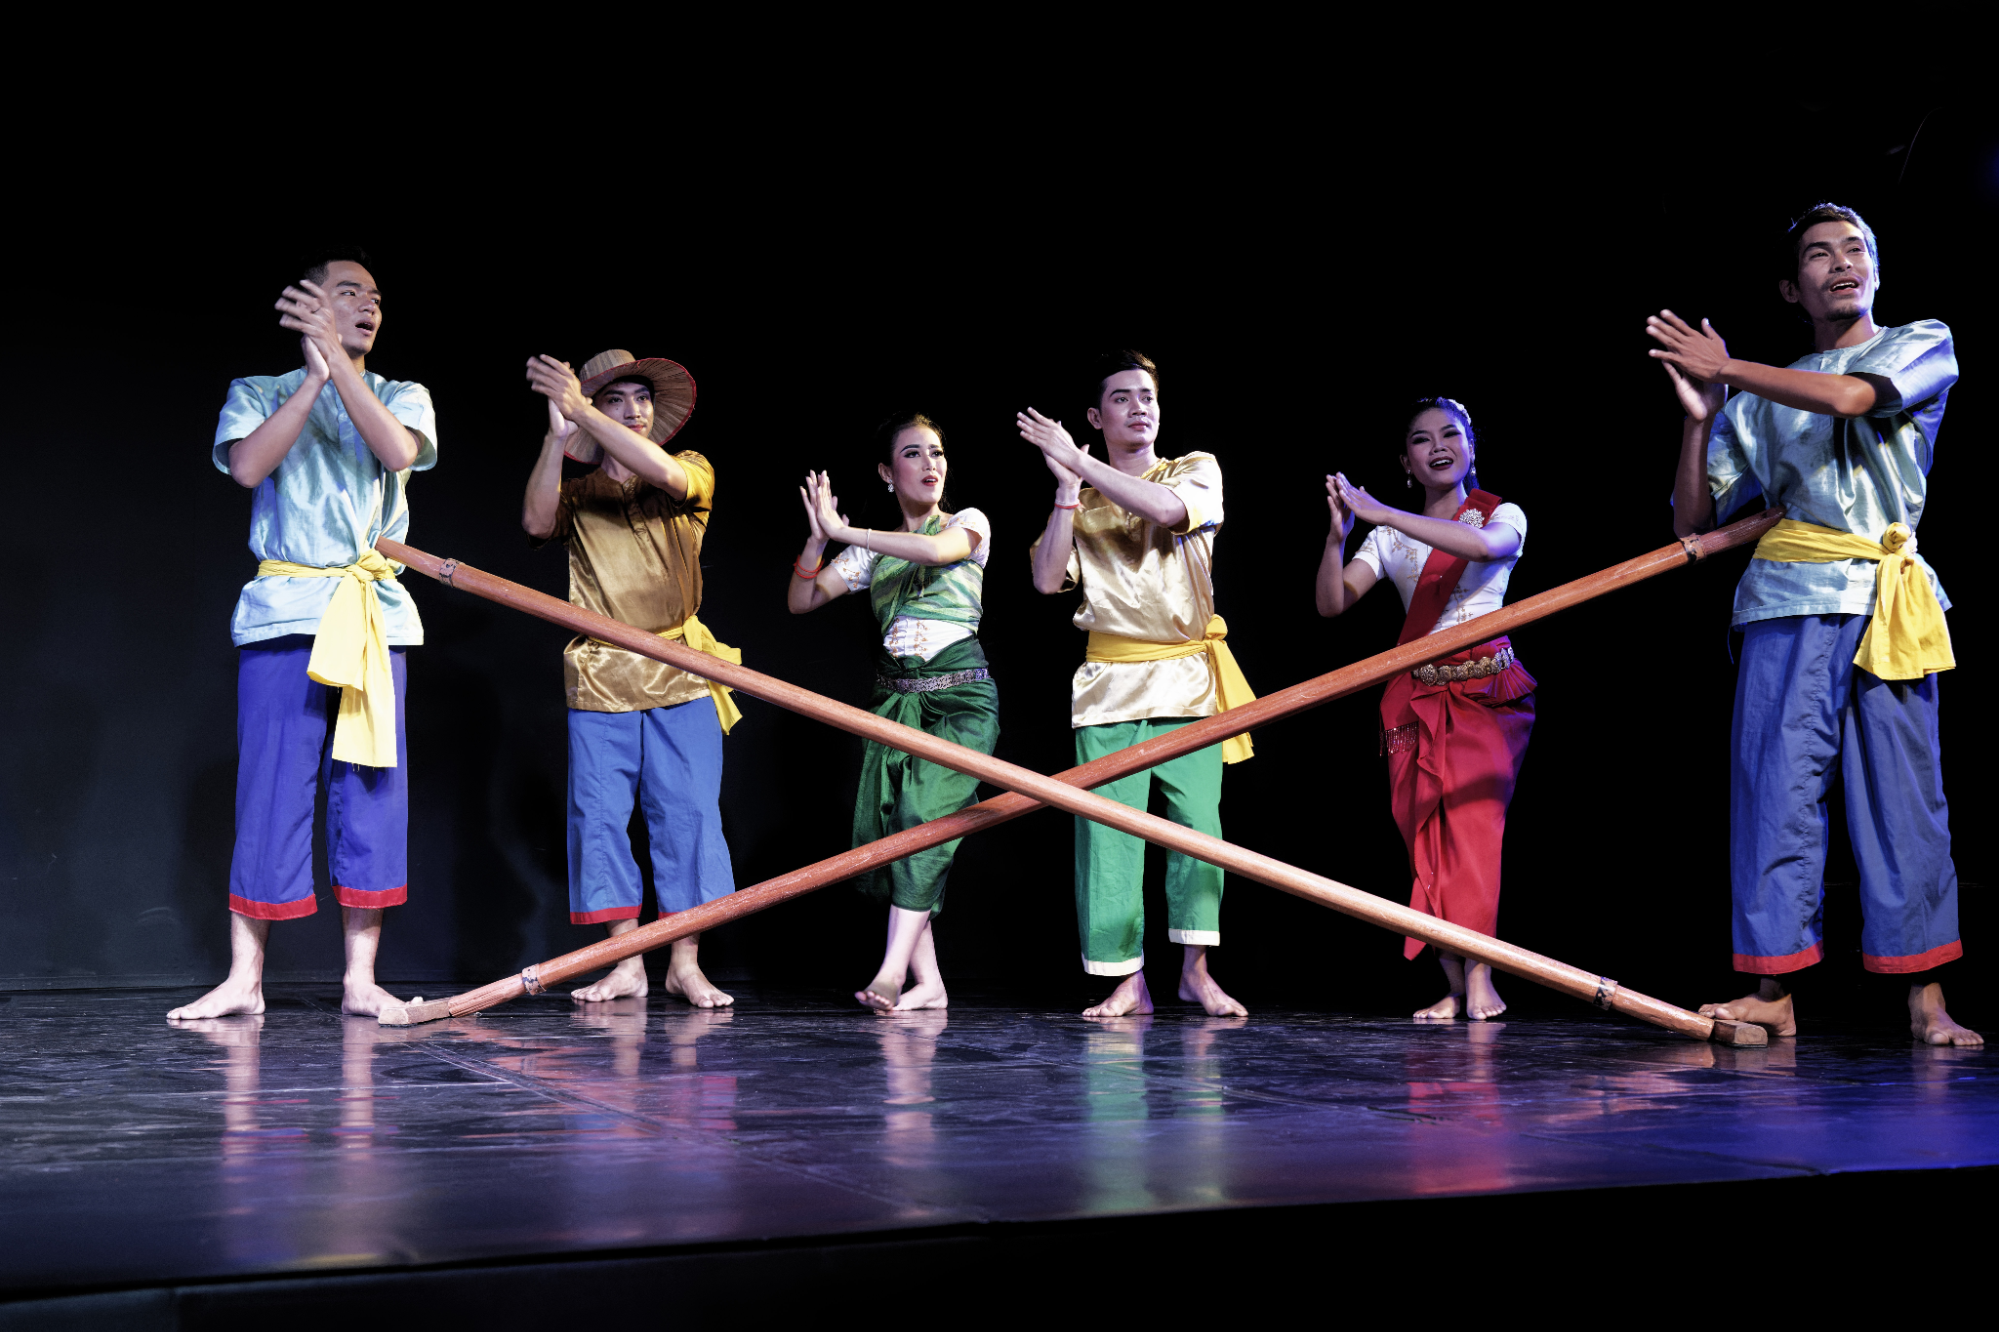 At the Cambodian Living Arts, visitors can participate in workshops to learn traditional dances